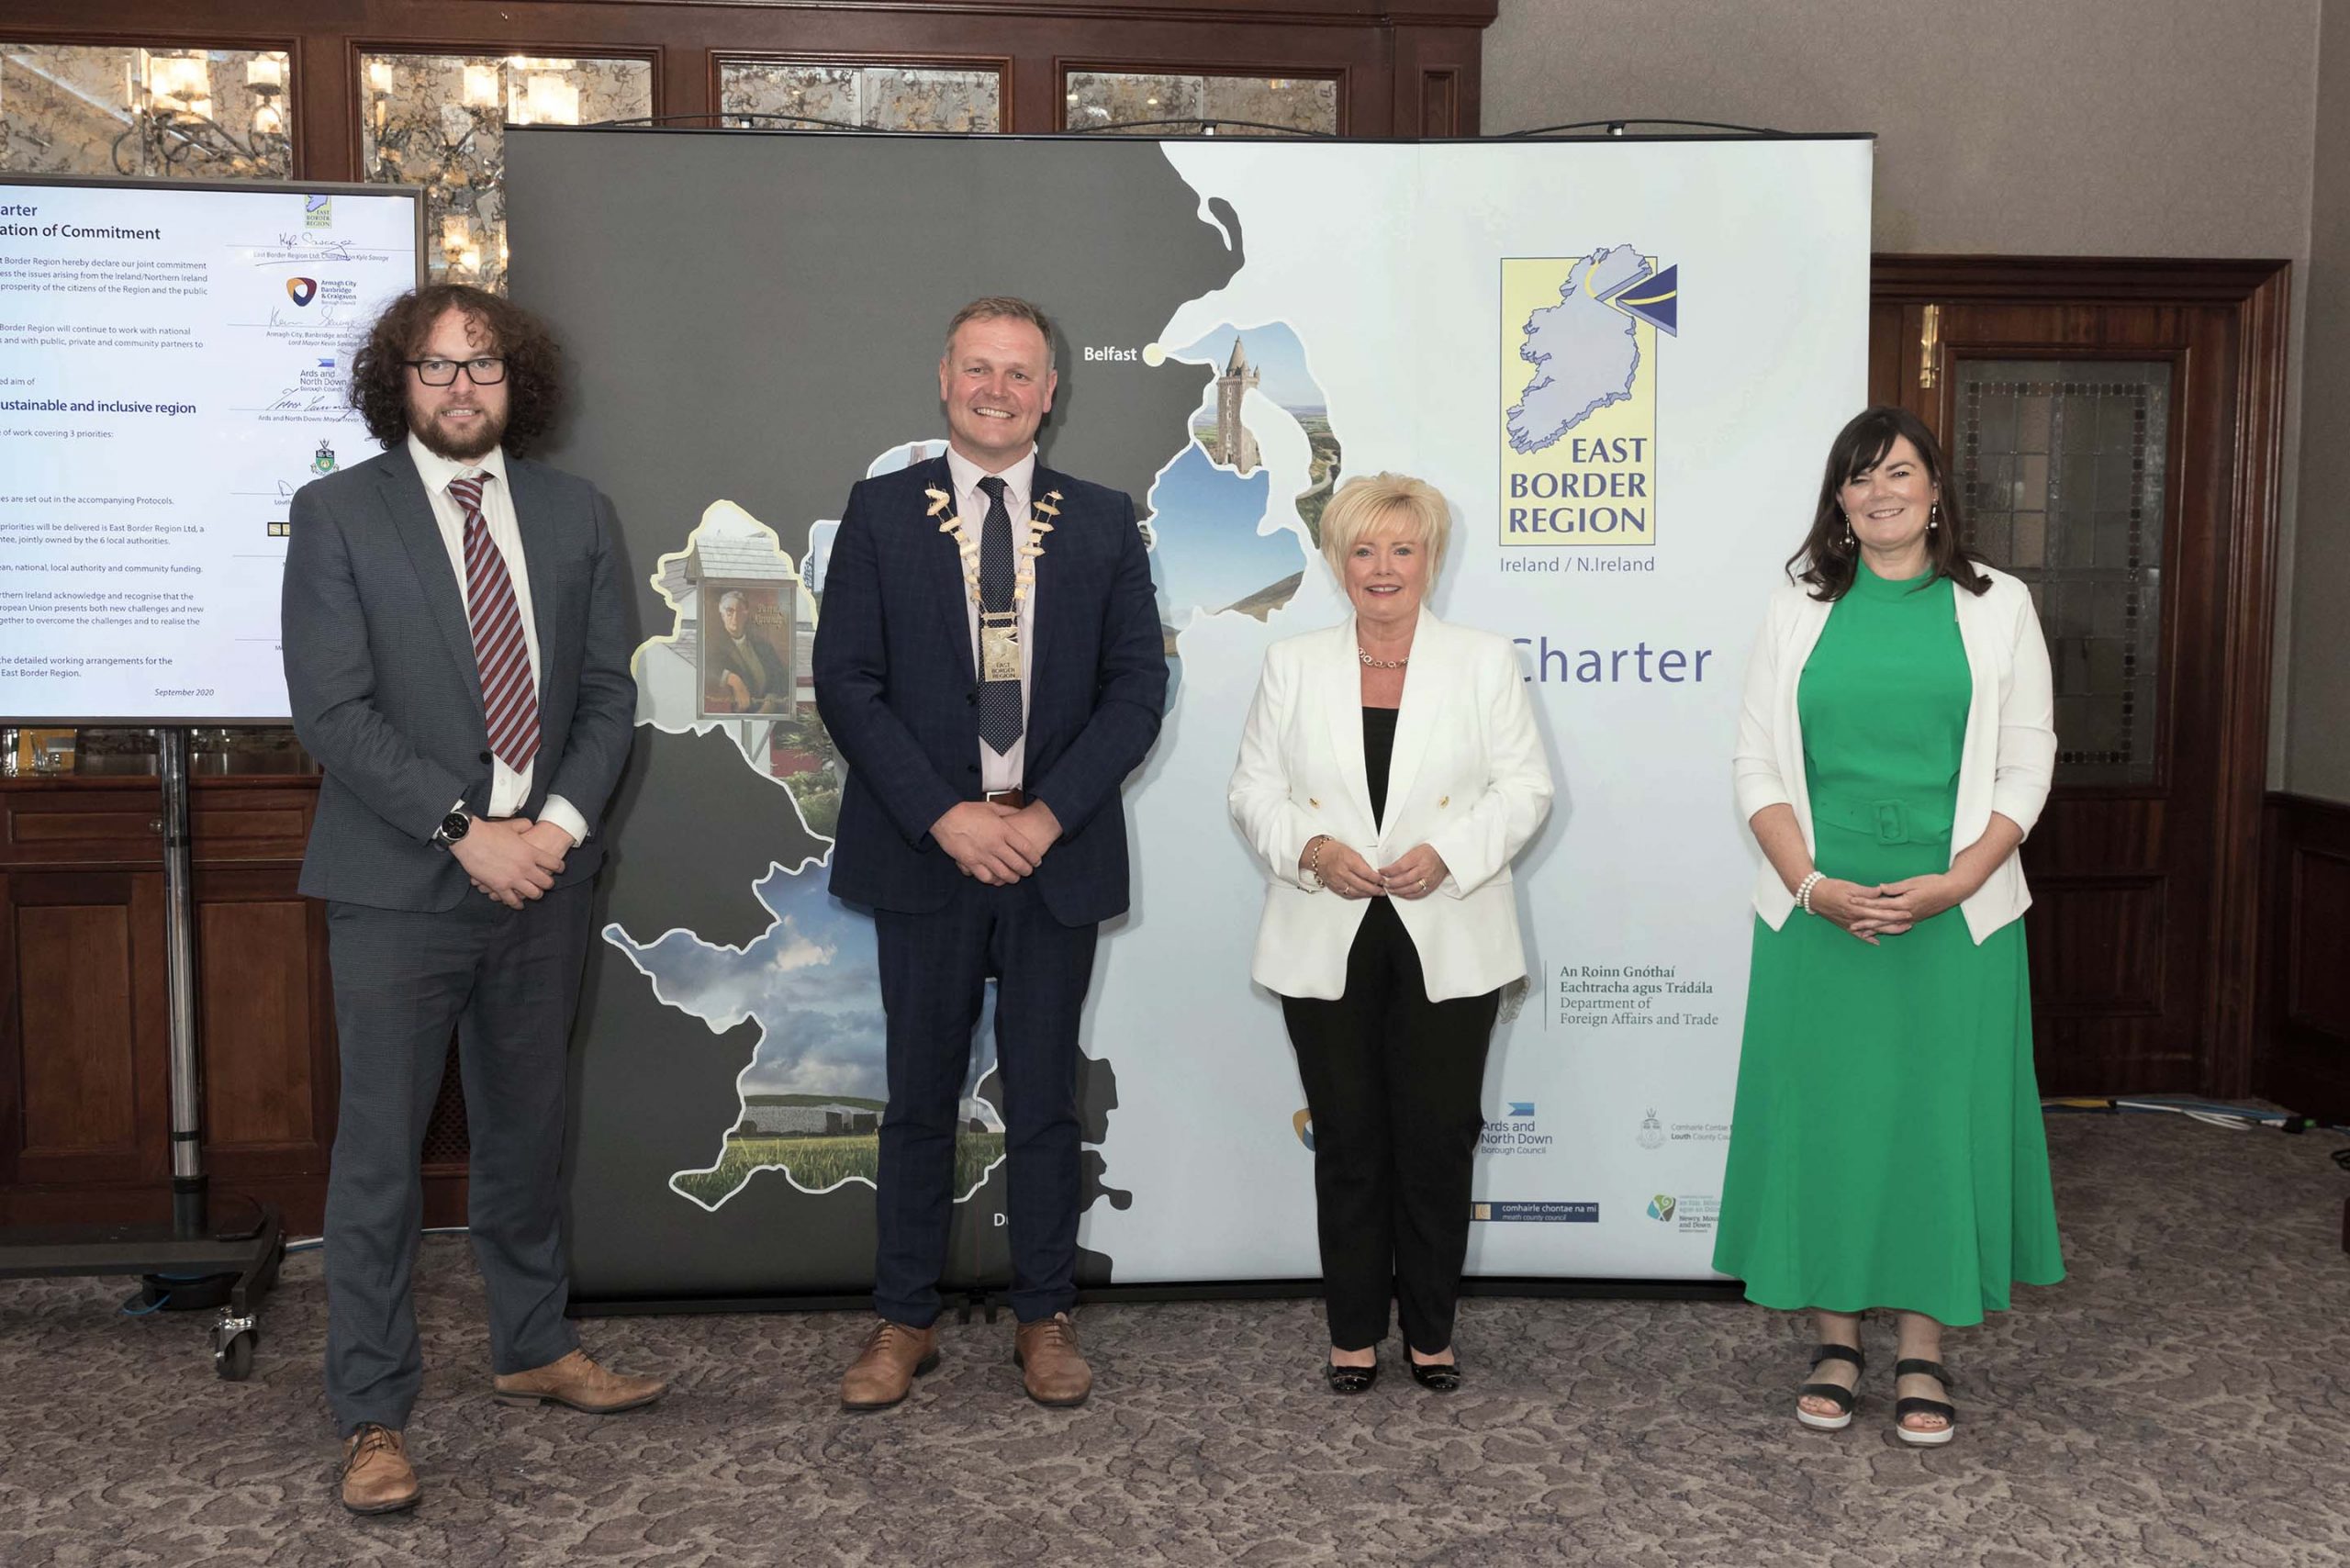 Launch of the EBR Charter in the Canal Court Hotel Newry on 23rd June 2021.